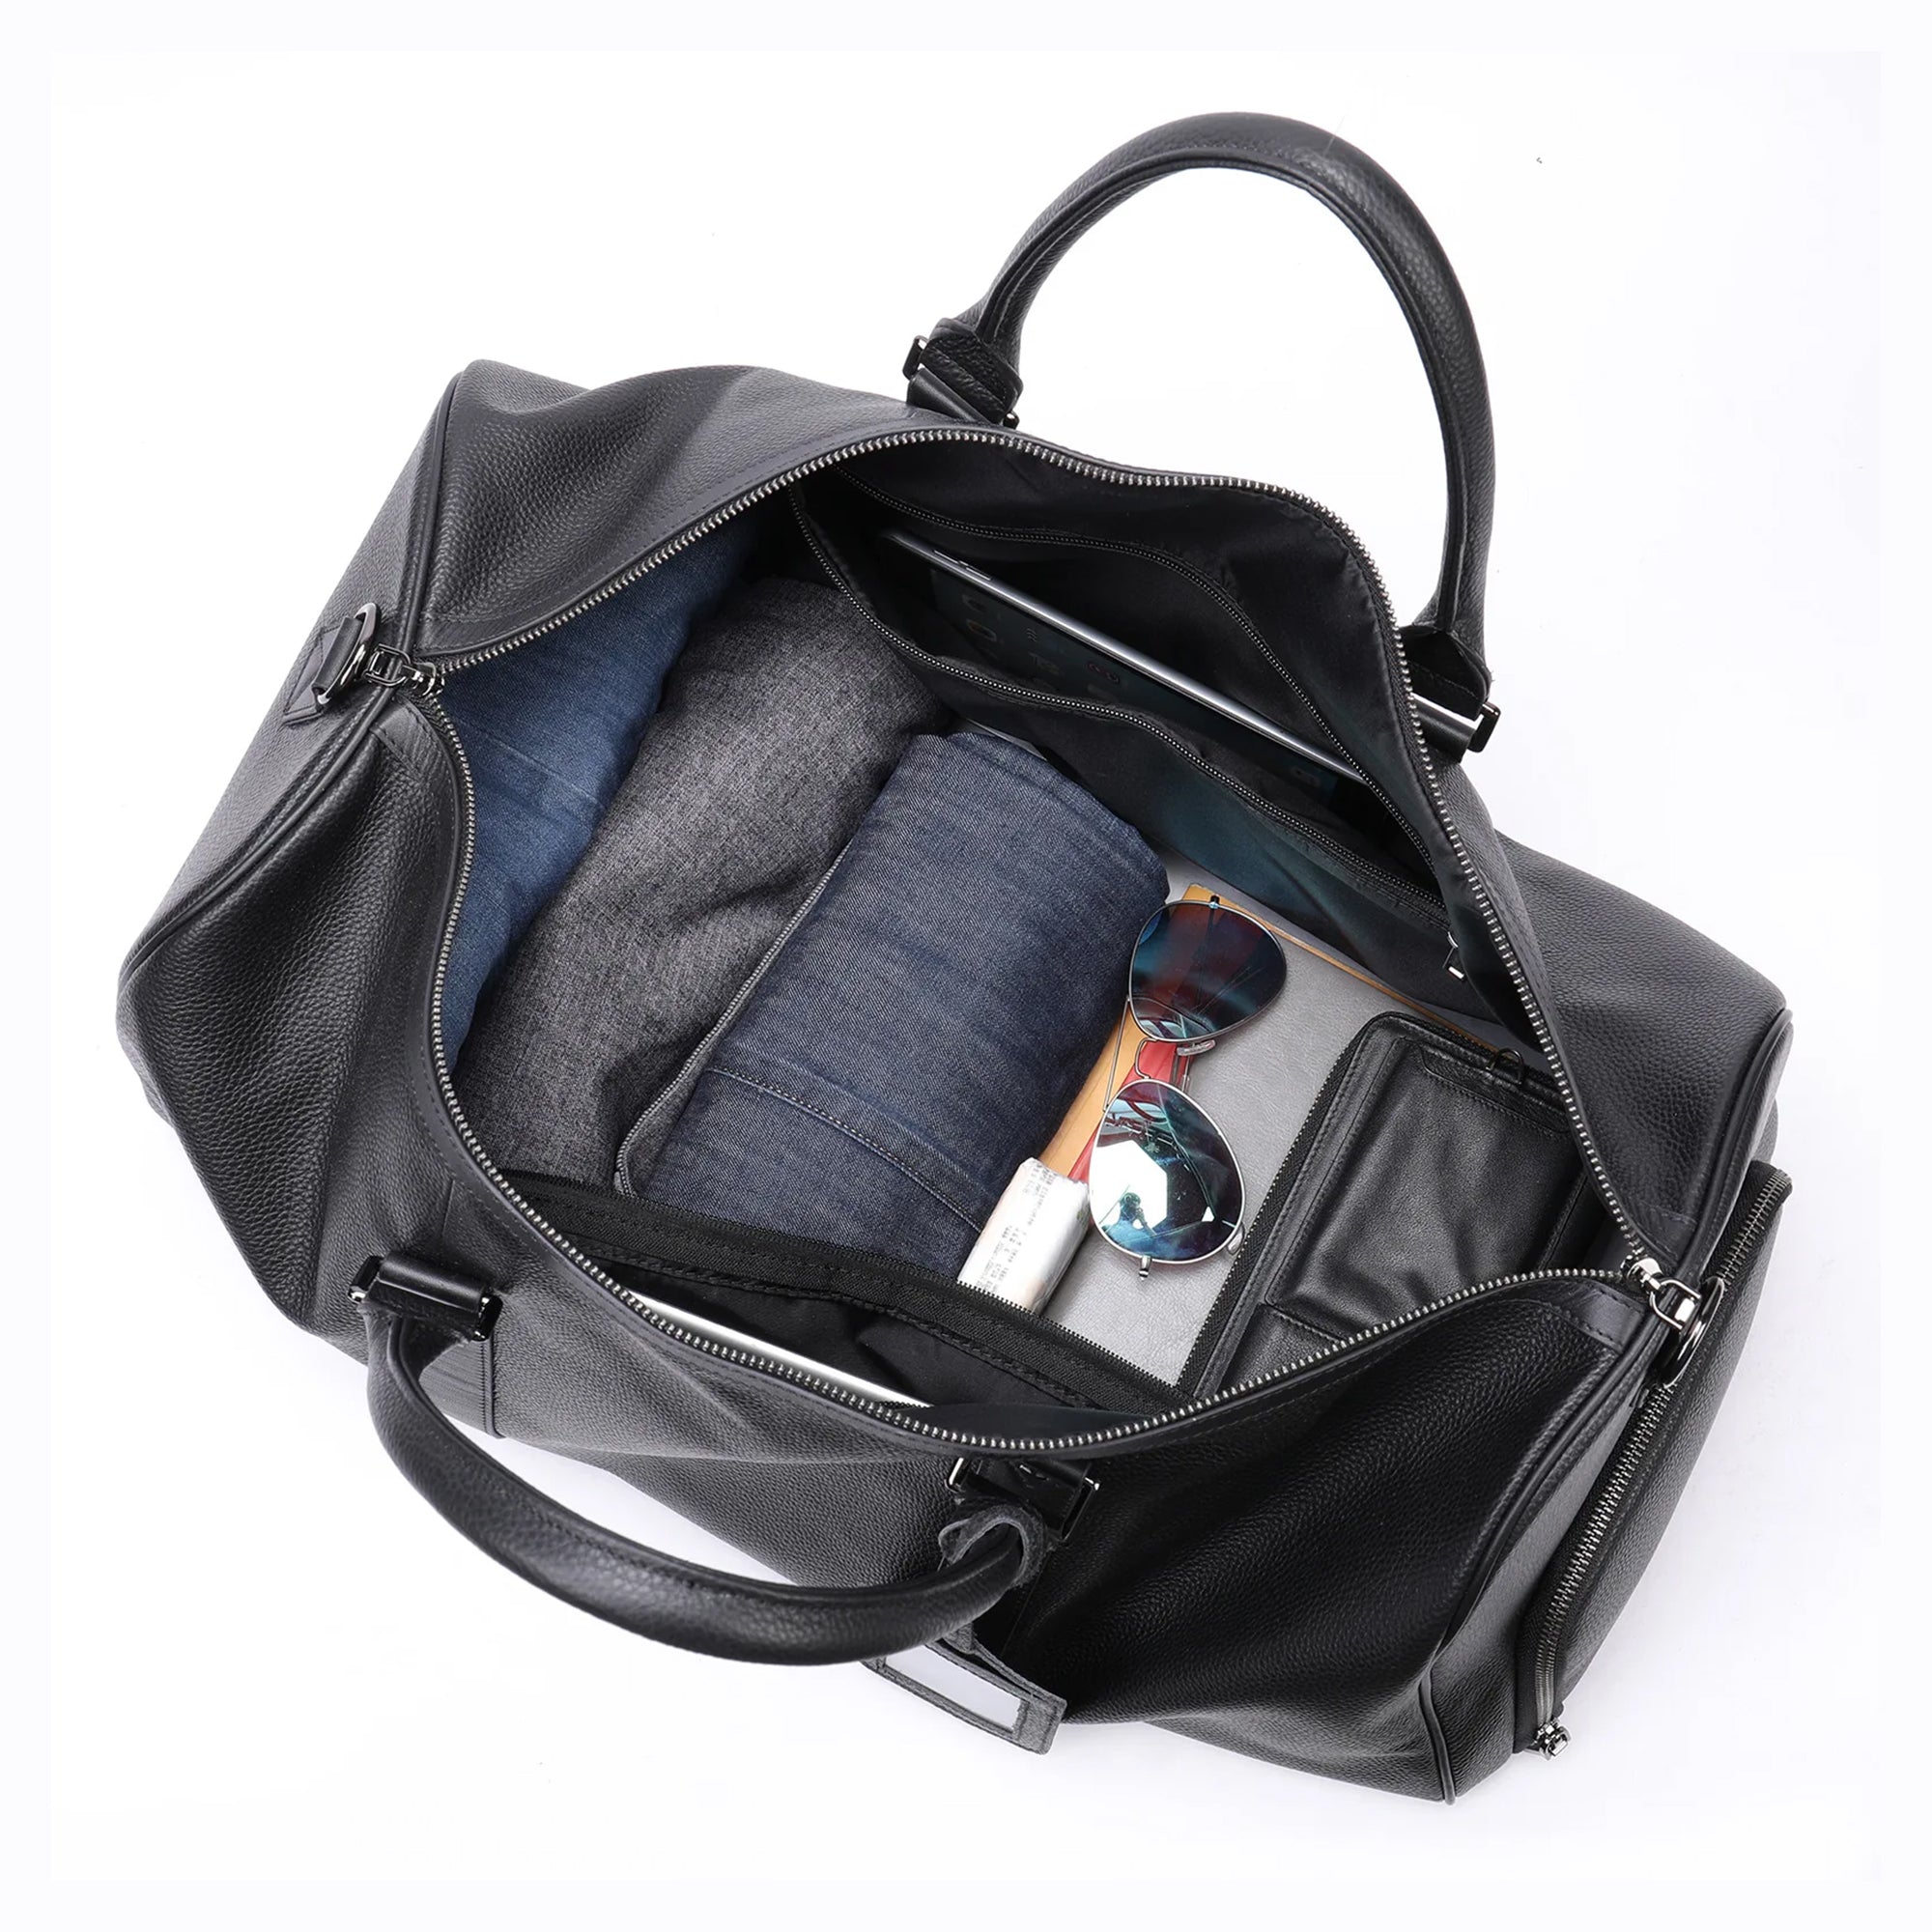 Genuine Leather Duffel Bag Travel Weekender Overnight Luggage Tote Duffle Bags for Men